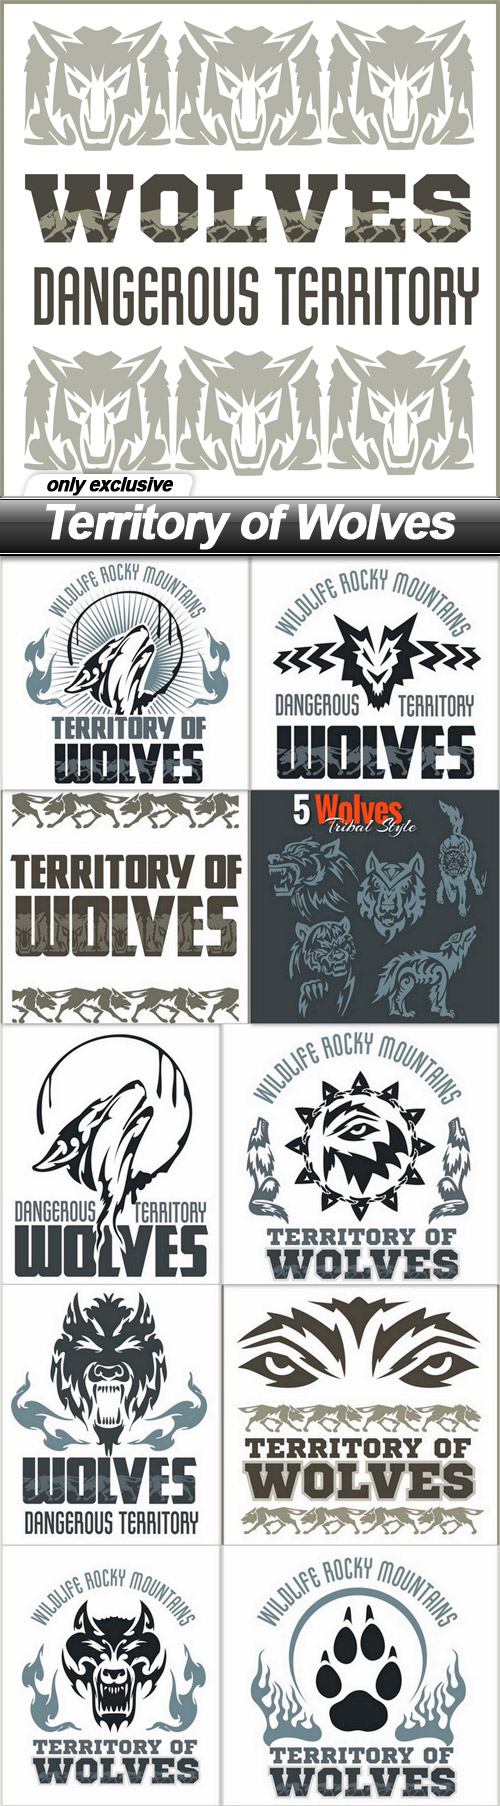 Territory of Wolves - 11 EPS